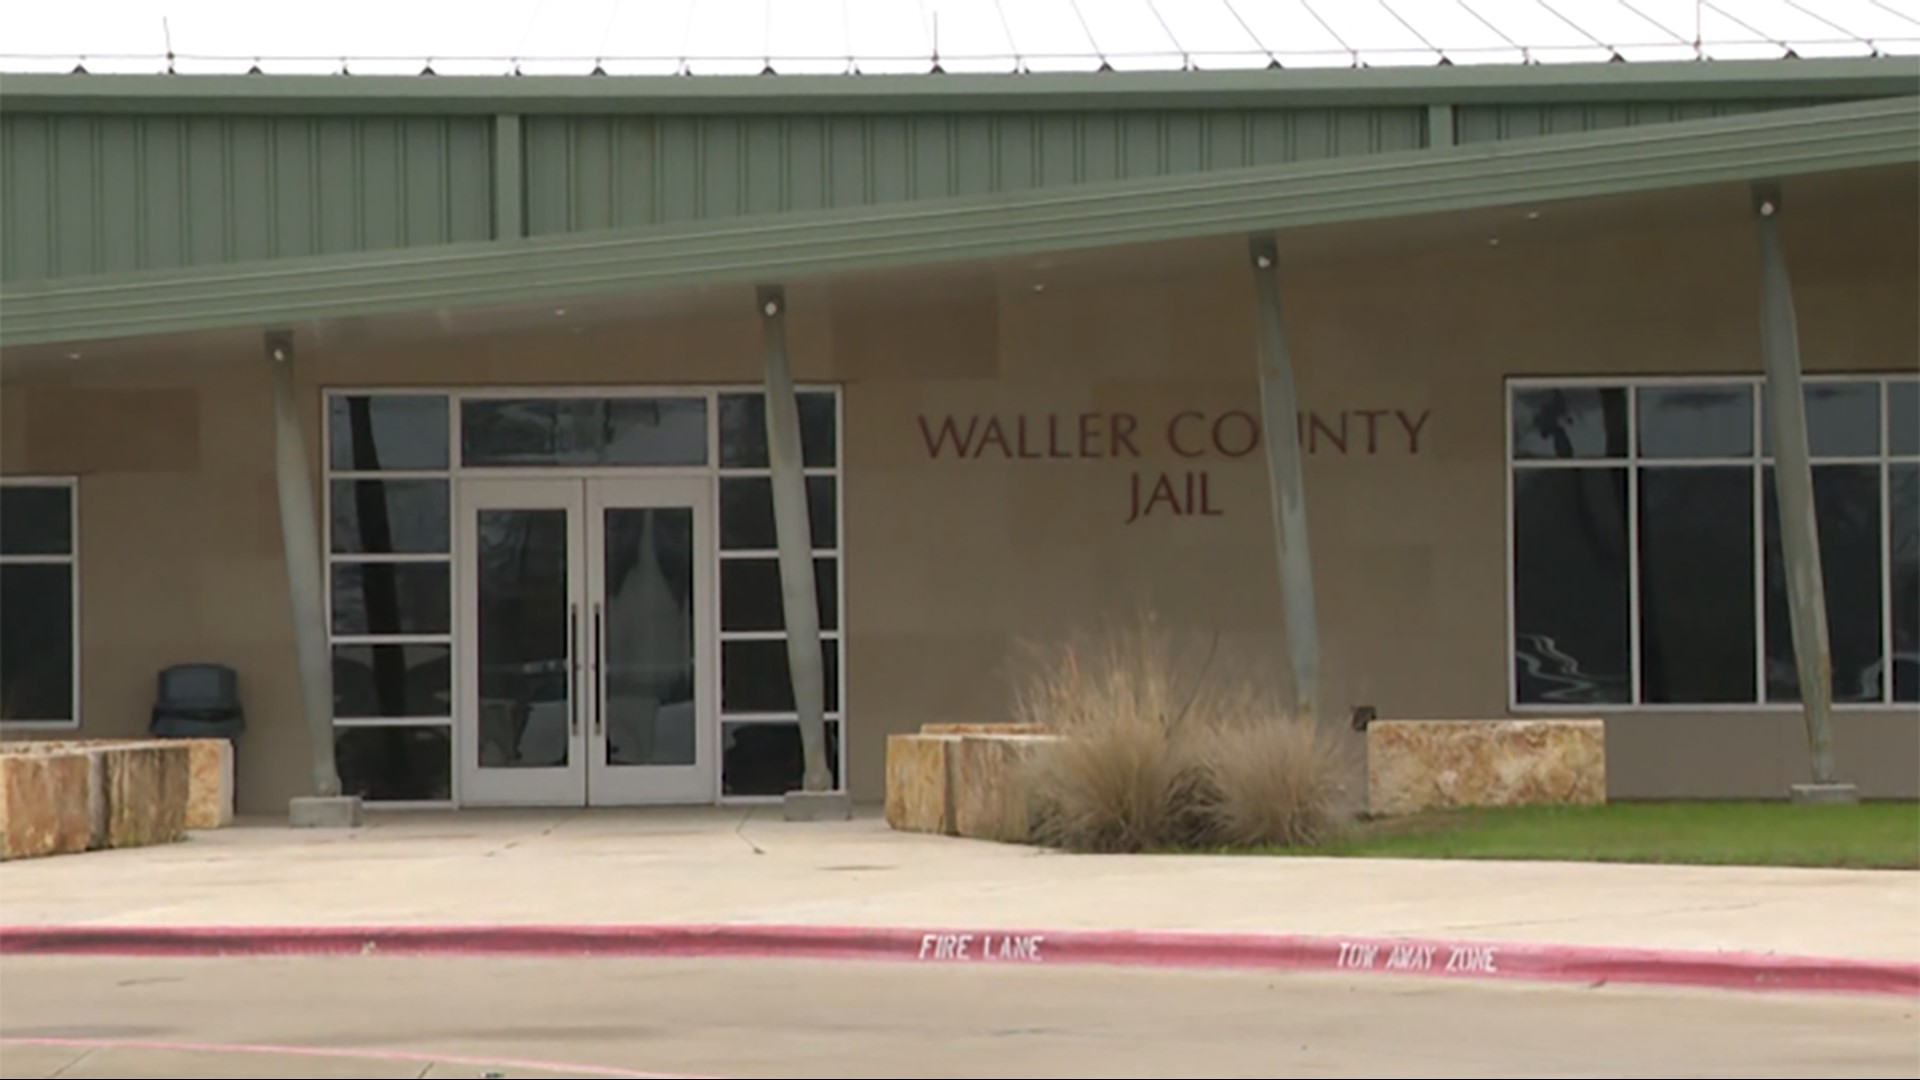 A deputy and a jailer got dizzy and nauseous before throwing up while processing an inmate. They were taken to an area hospital to find out what happened.